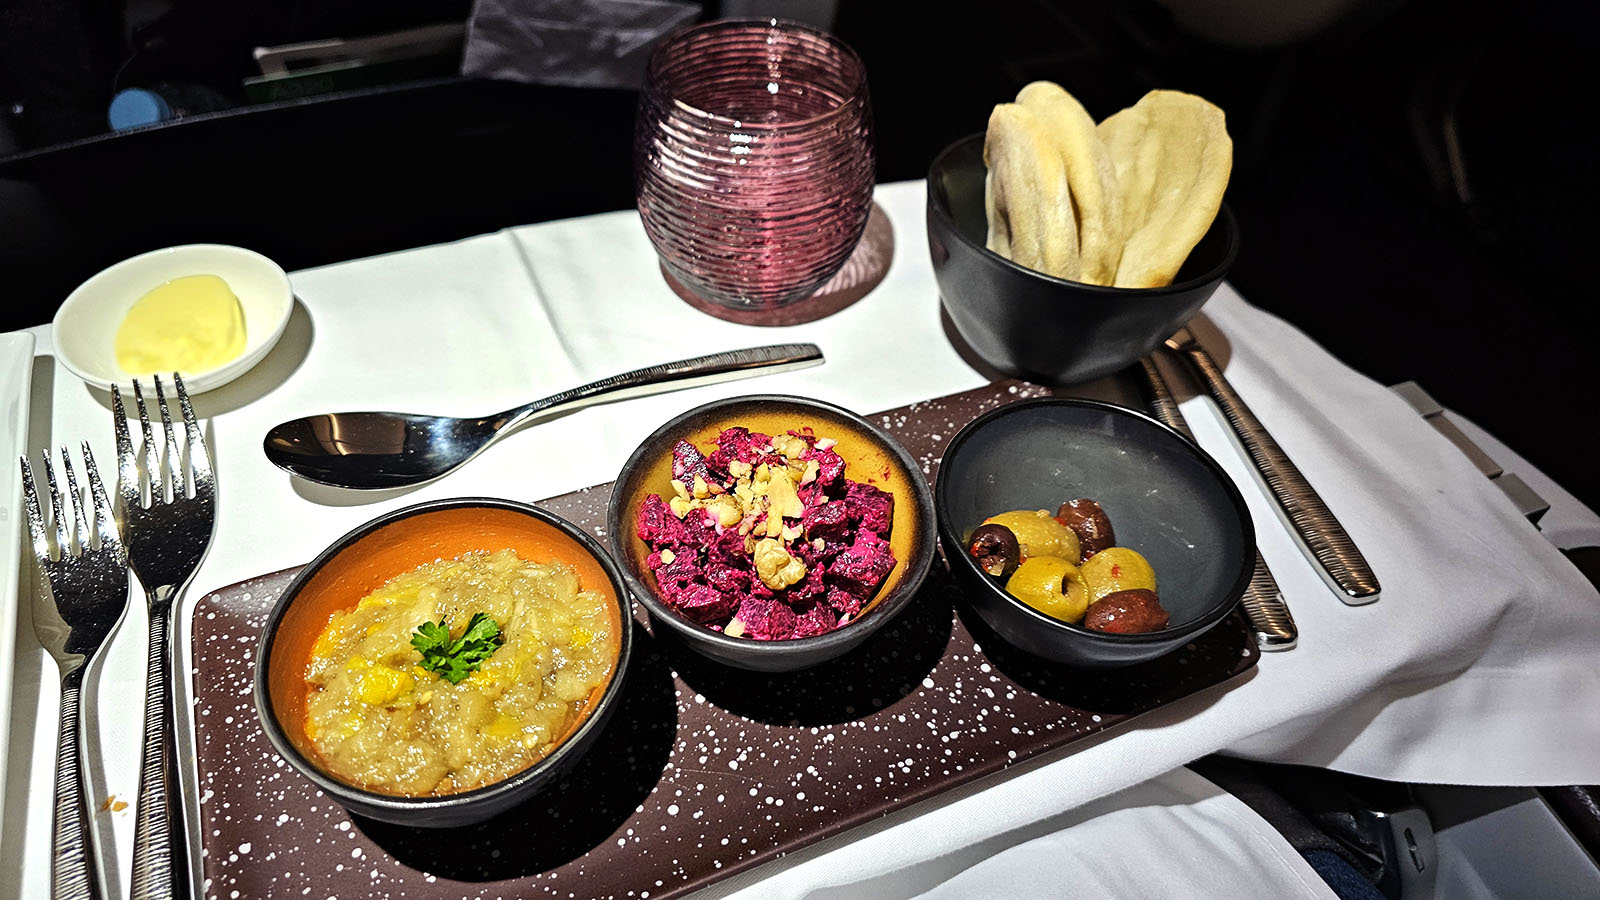 Dips in Business Class on Qatar Airways' Airbus A320